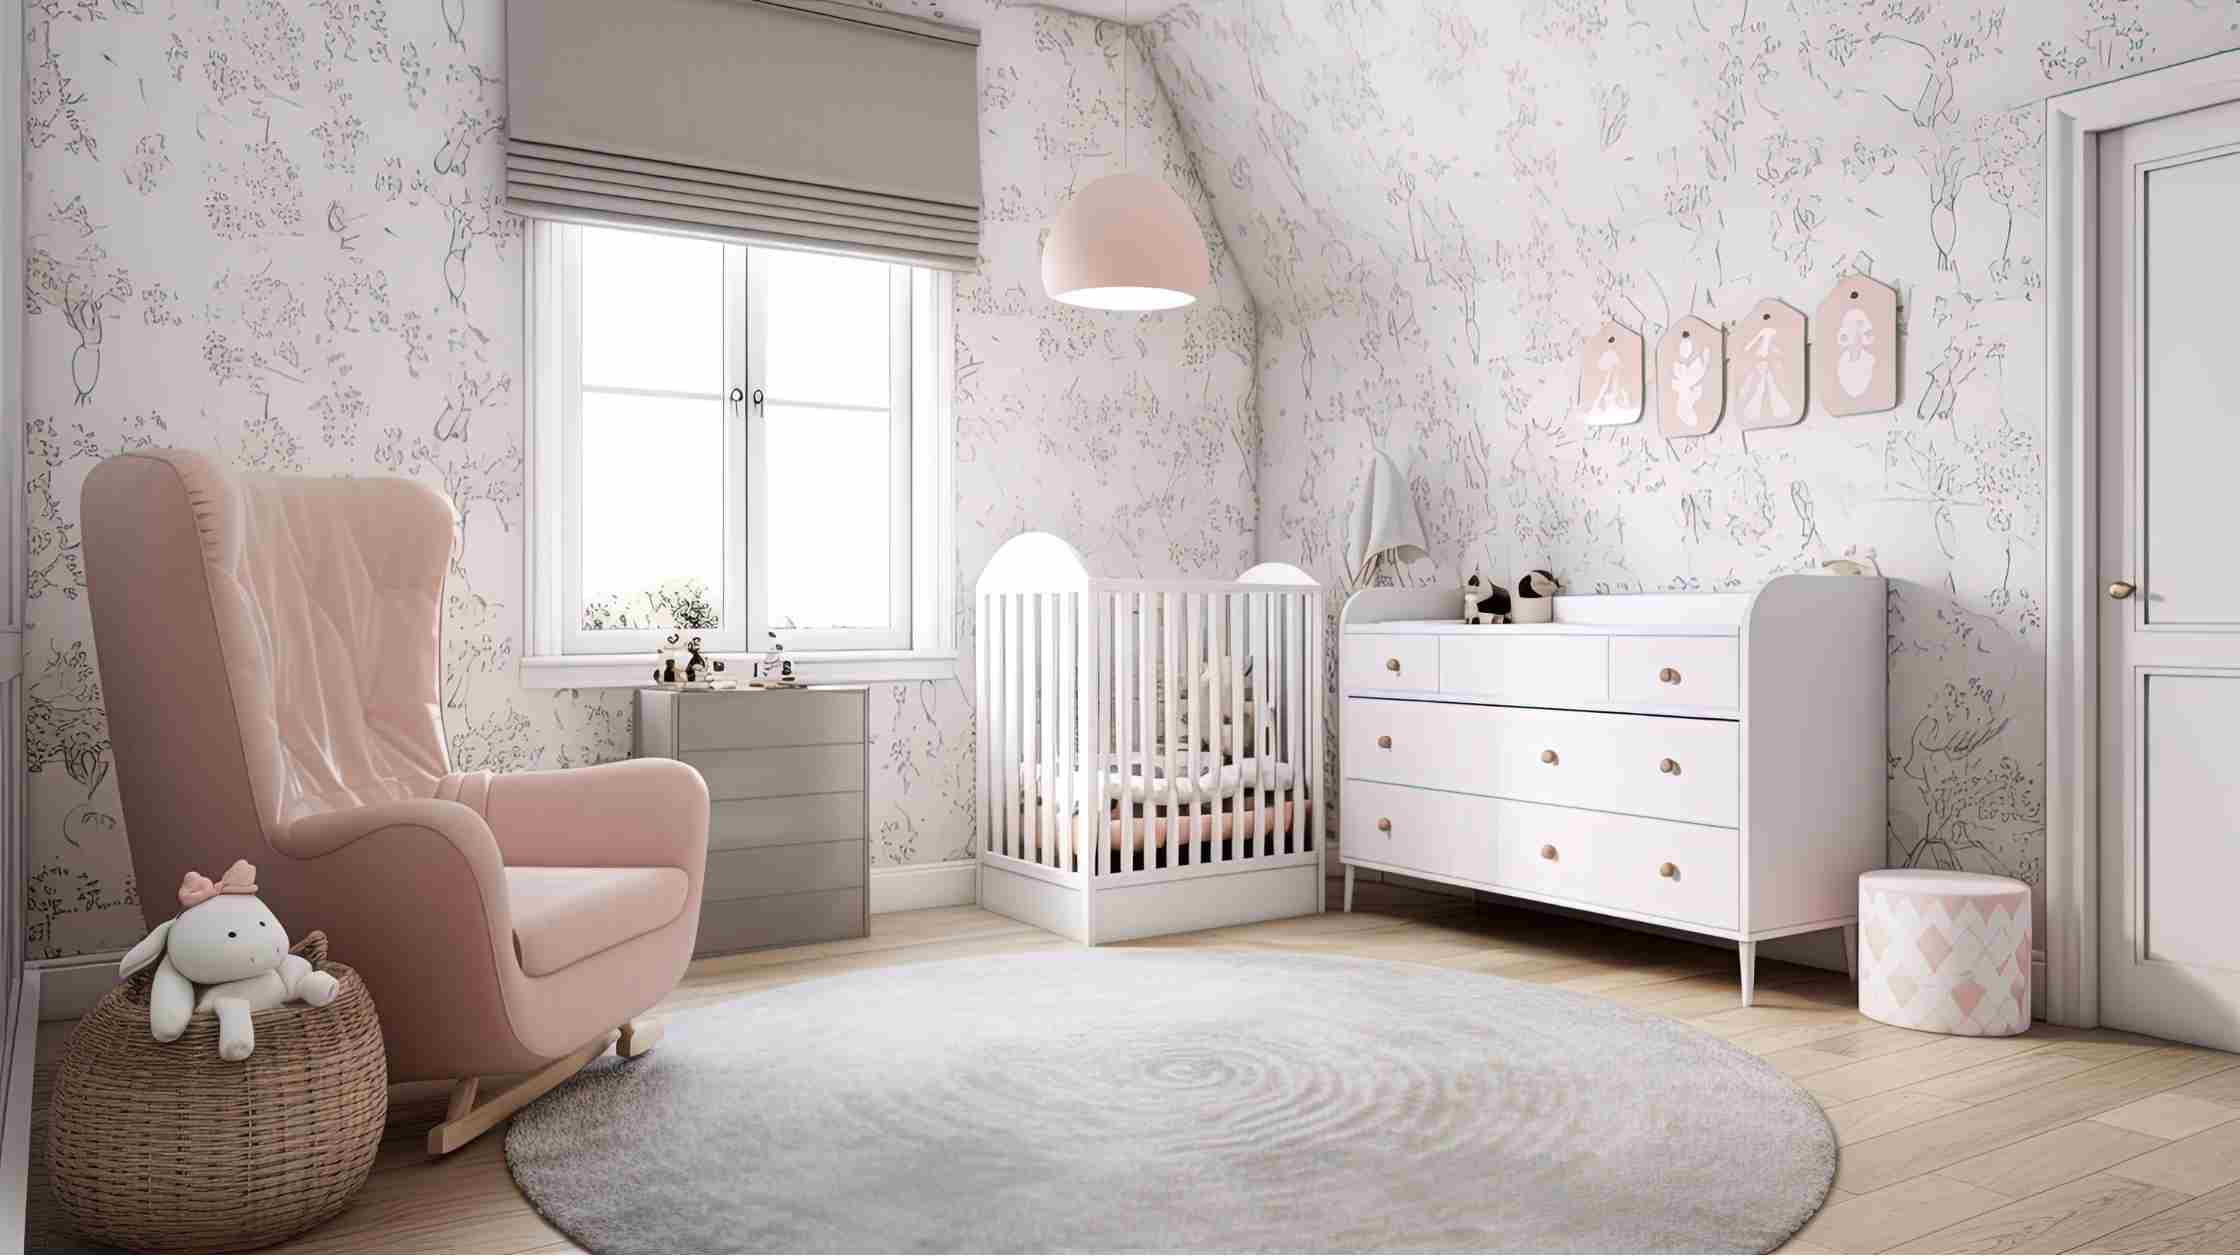 How To Soundproof Baby Room Apartment (5 Different Ways)